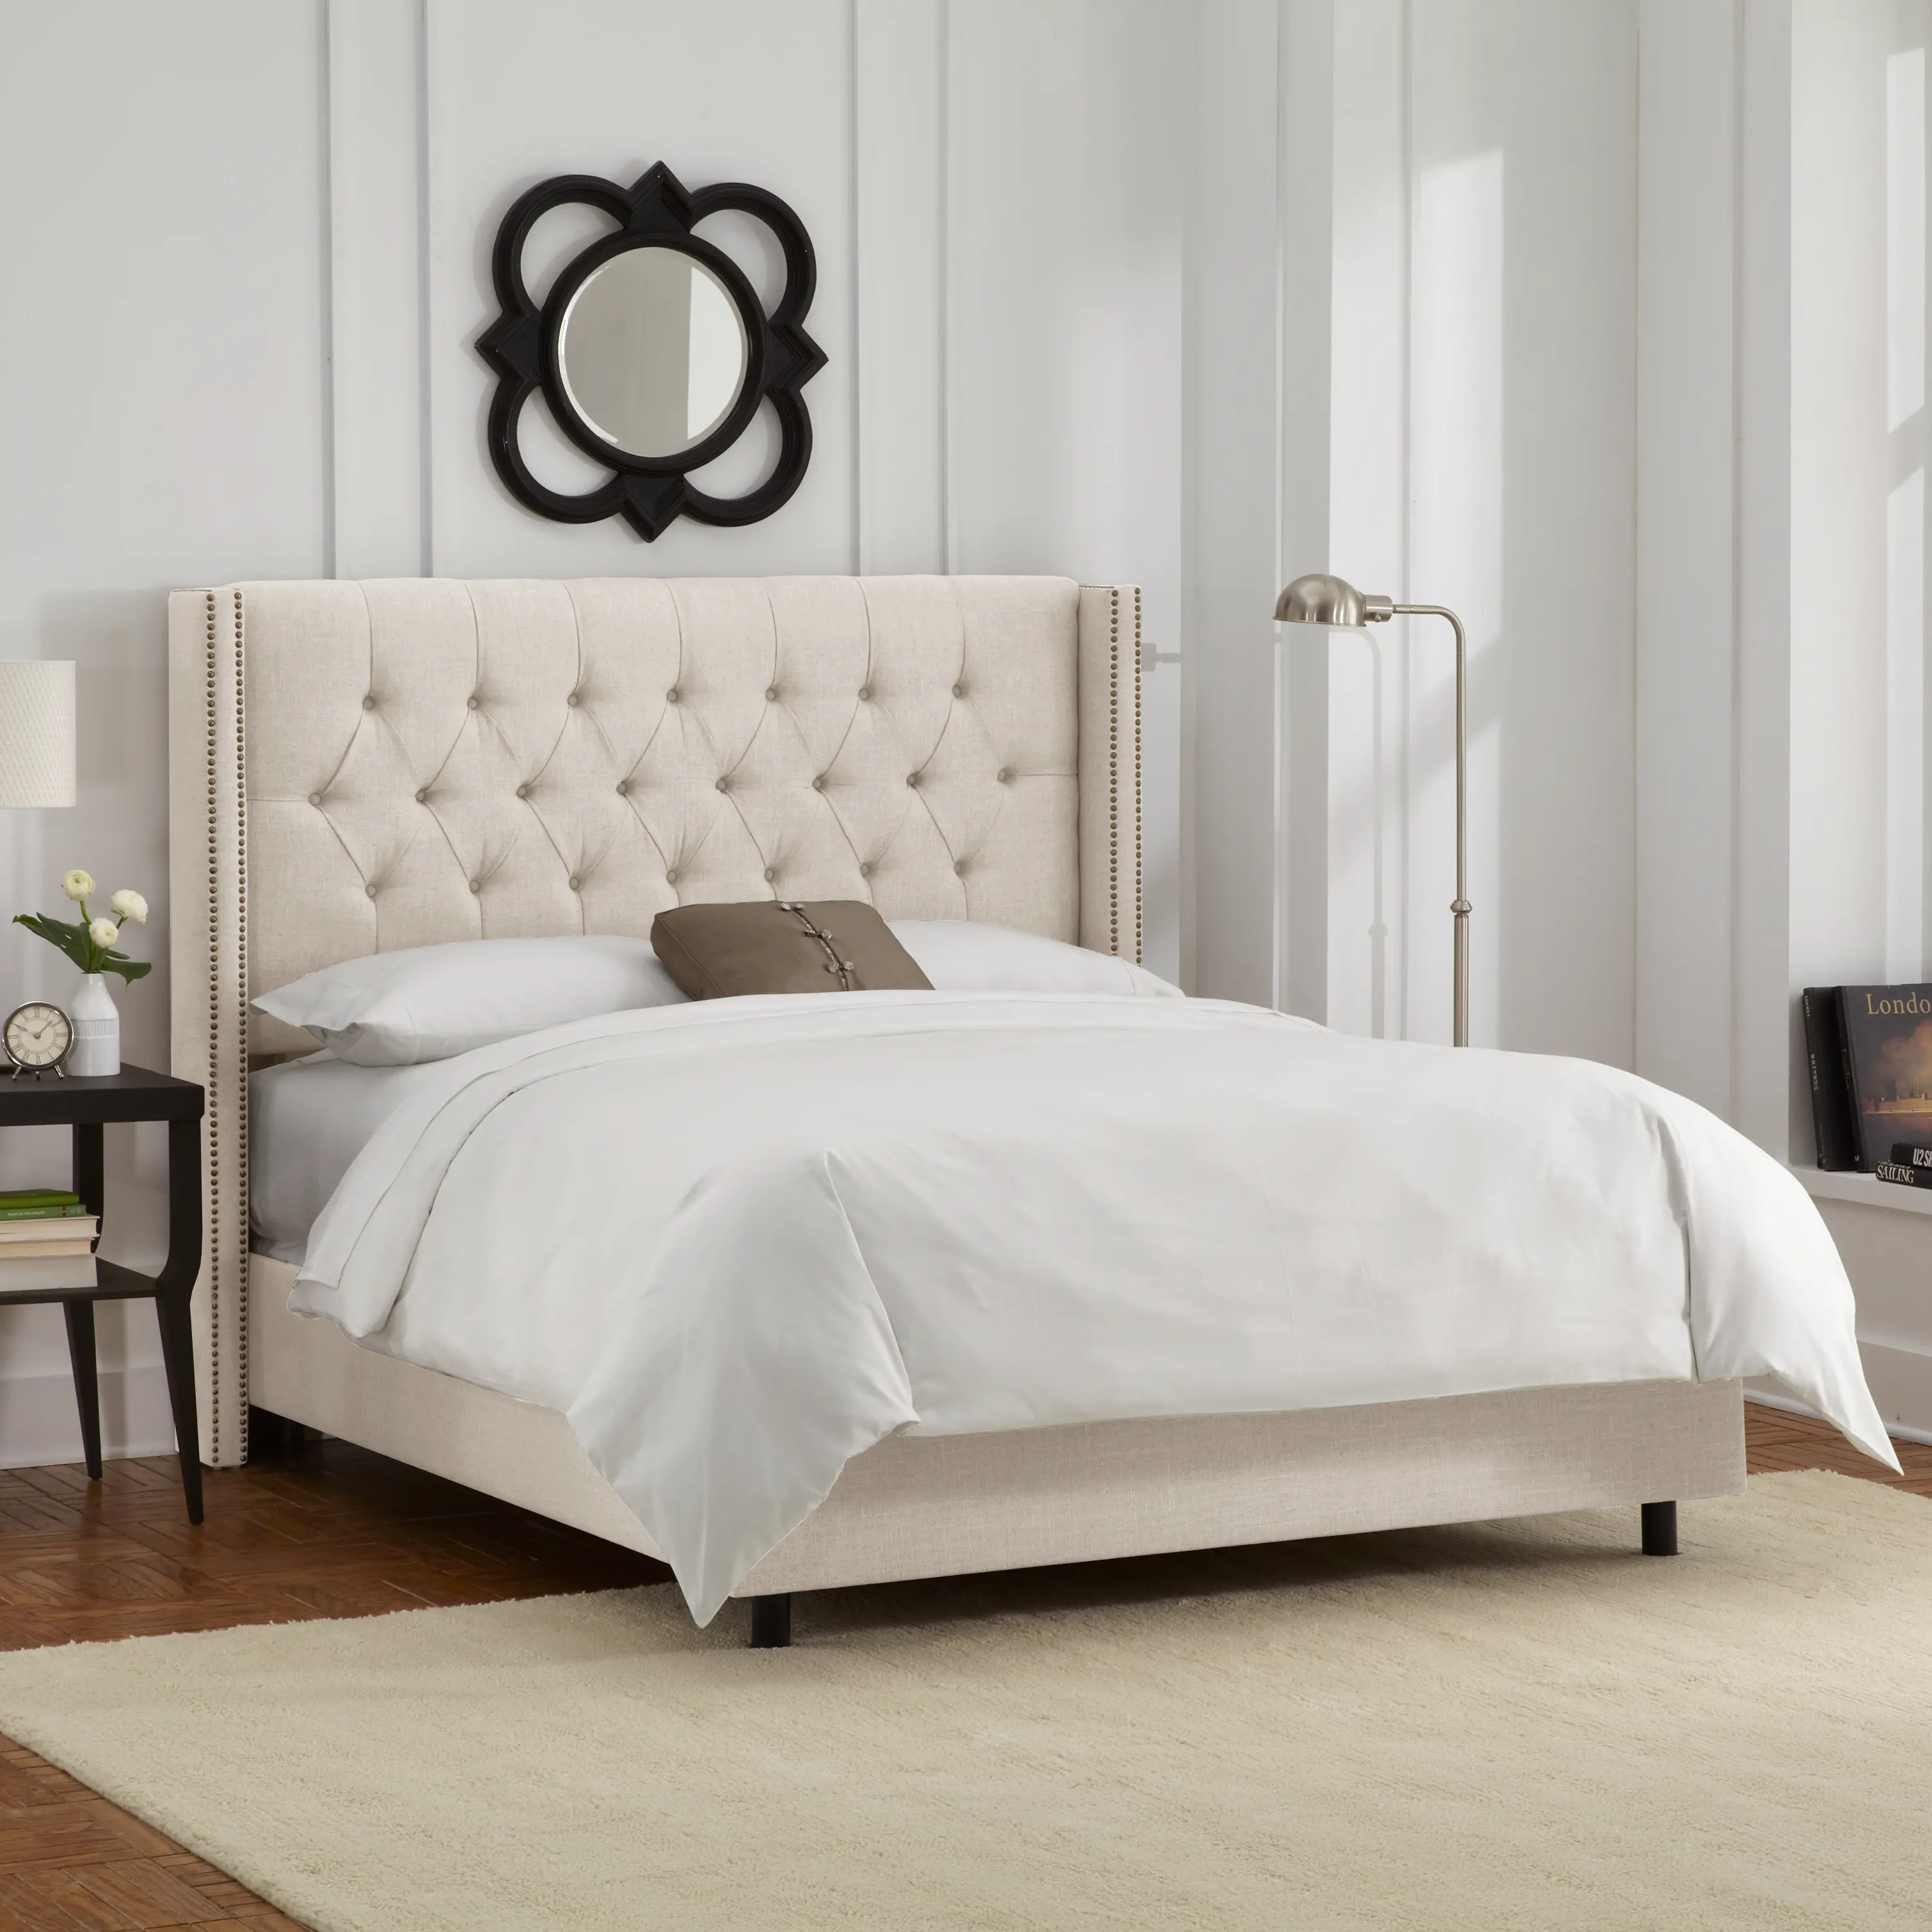 Abigail Ivory Diamond Tufted Wingback Queen Bed - Skyline Furniture